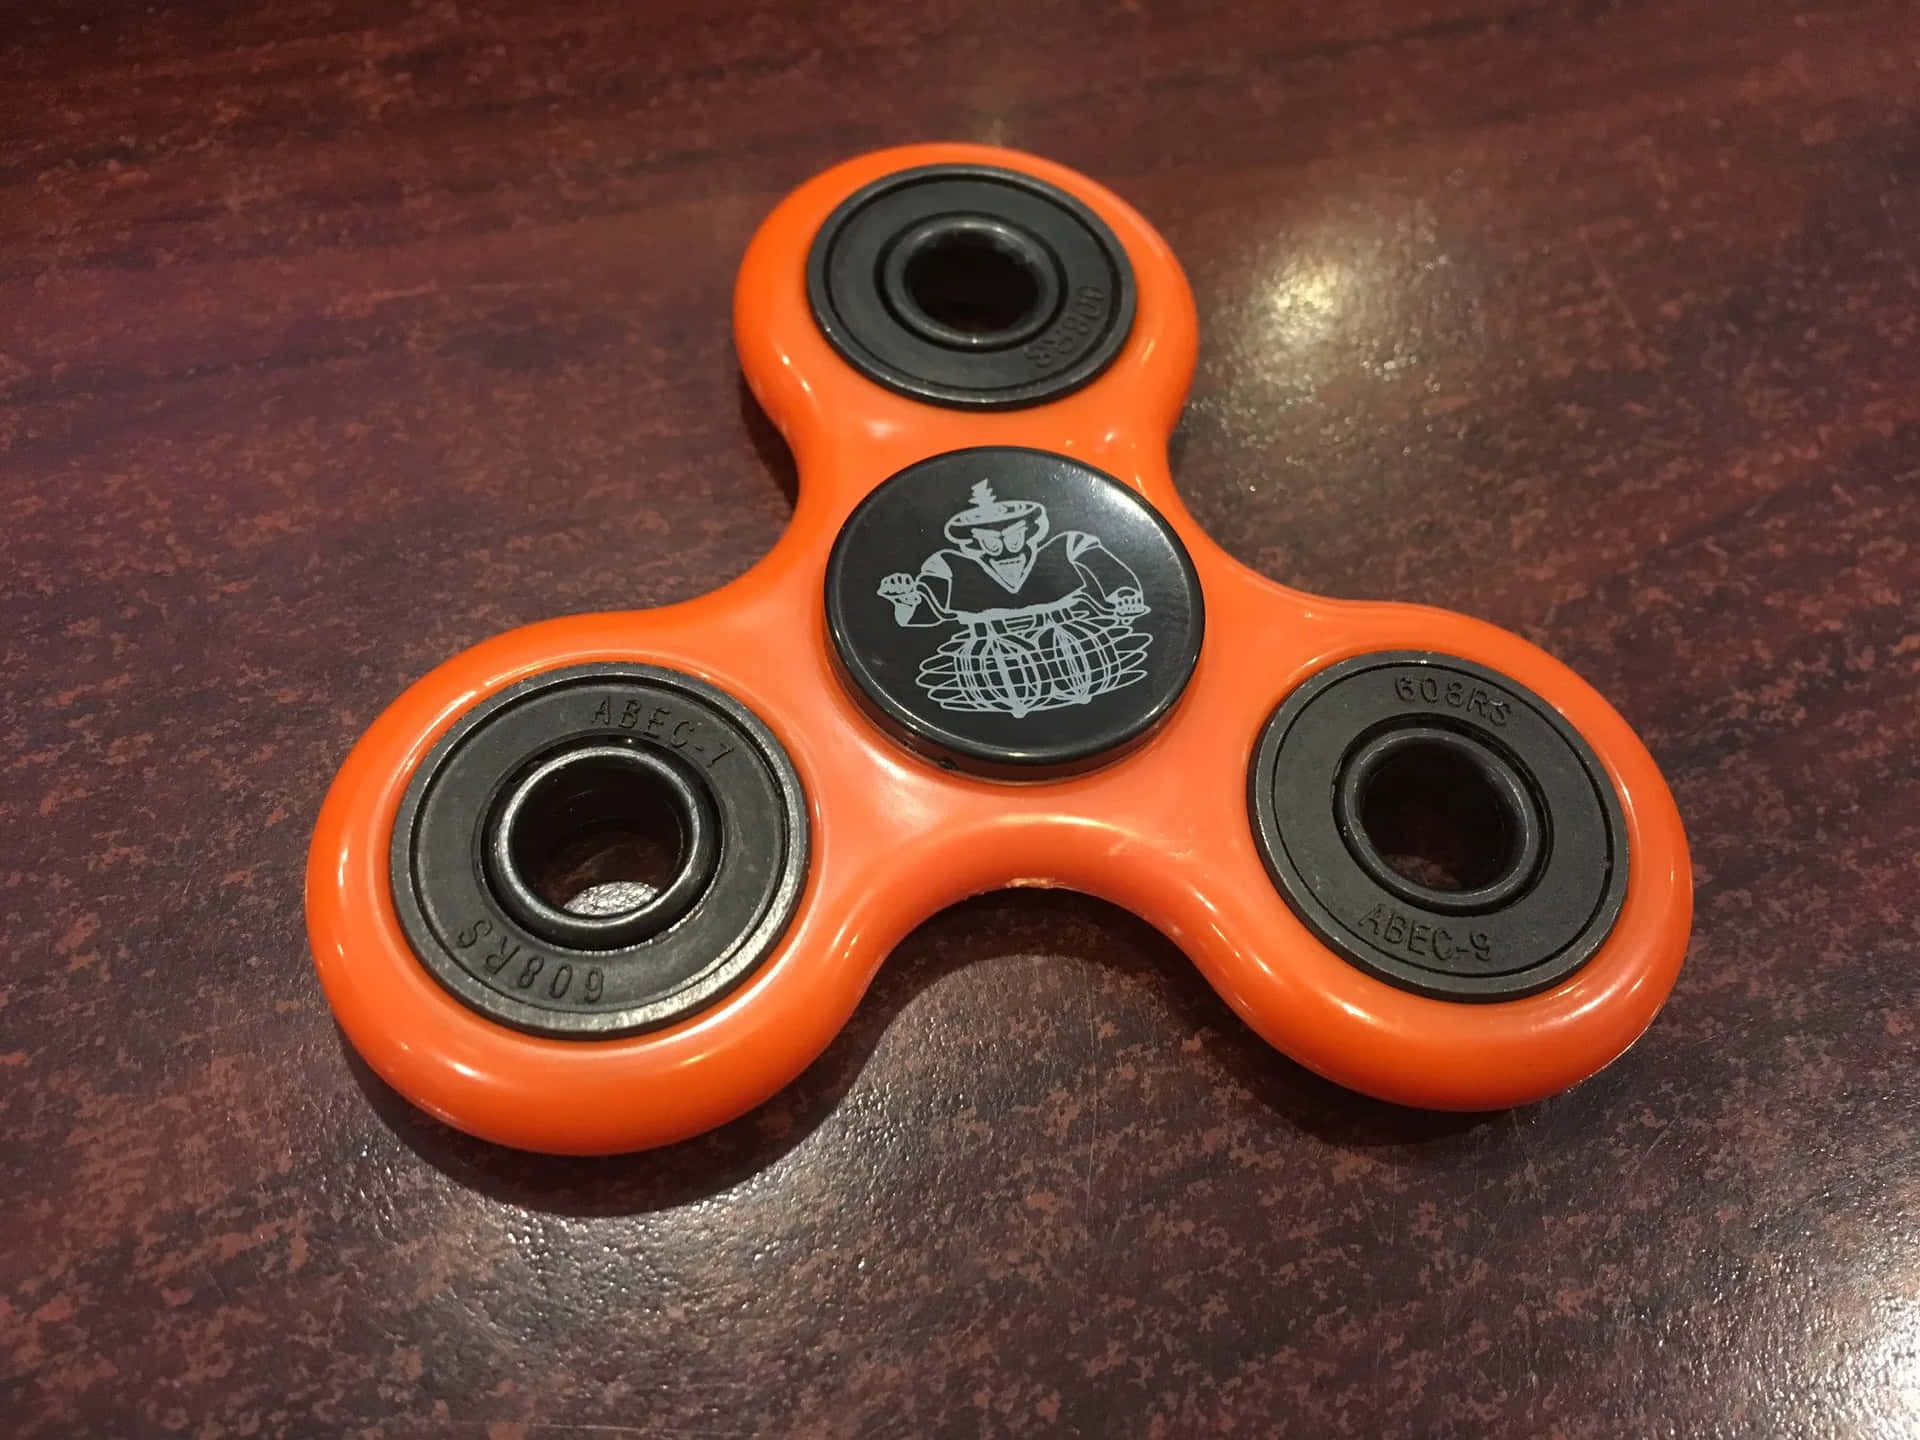 Fidget your way to focus and success!